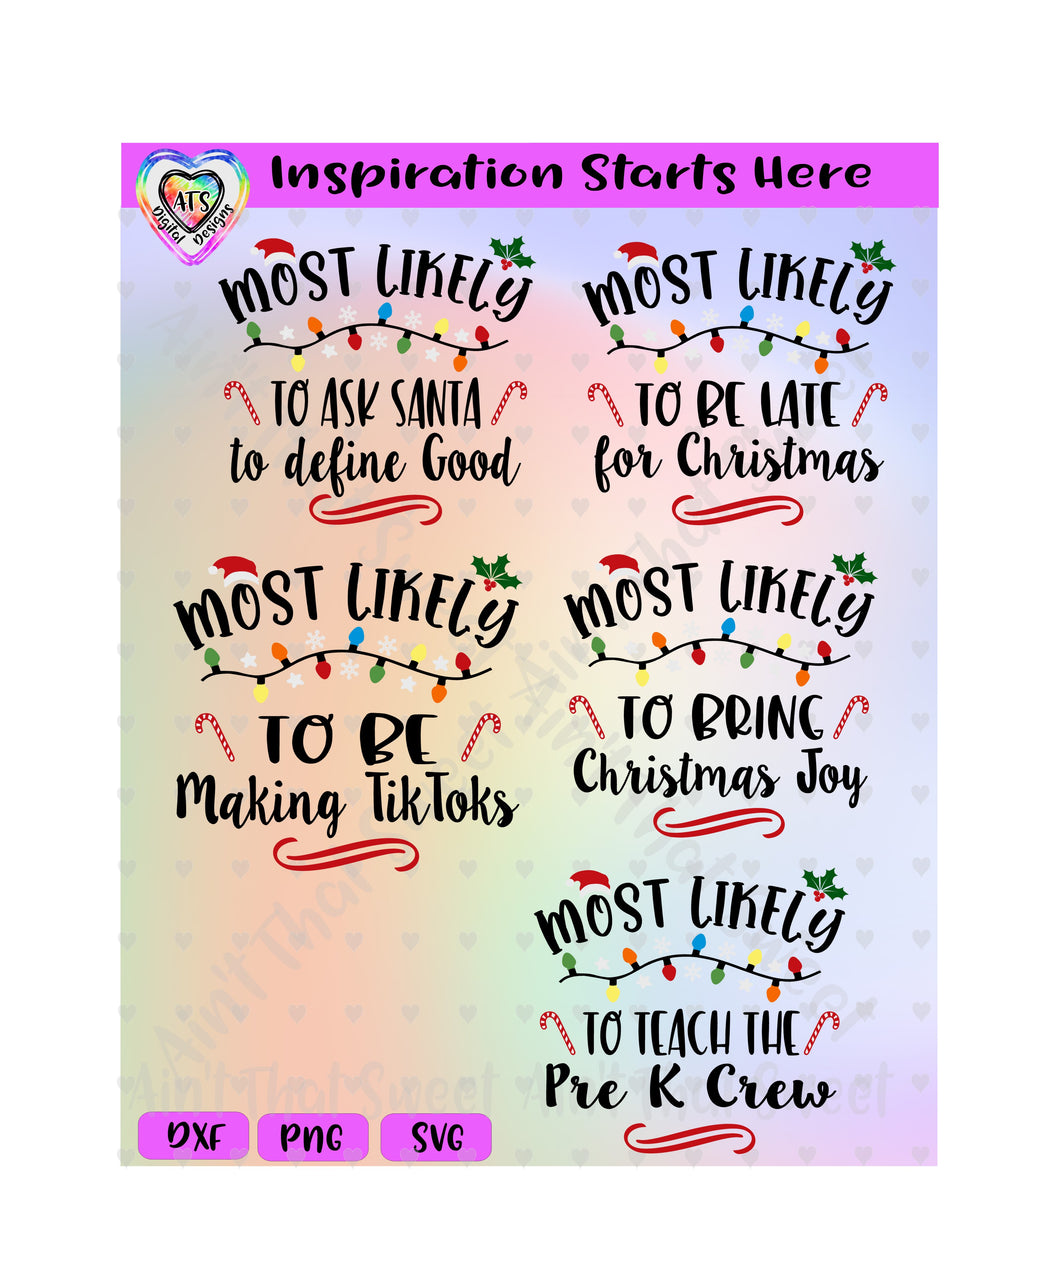 Most Likely Set: Ask Santa to Define Good; Be Late For Christmas; Making TikToks; Bring Christmas Joy; Teach PreK Crew - Transparent PNG SVG DXF - Silhouette, Cricut, ScanNCut